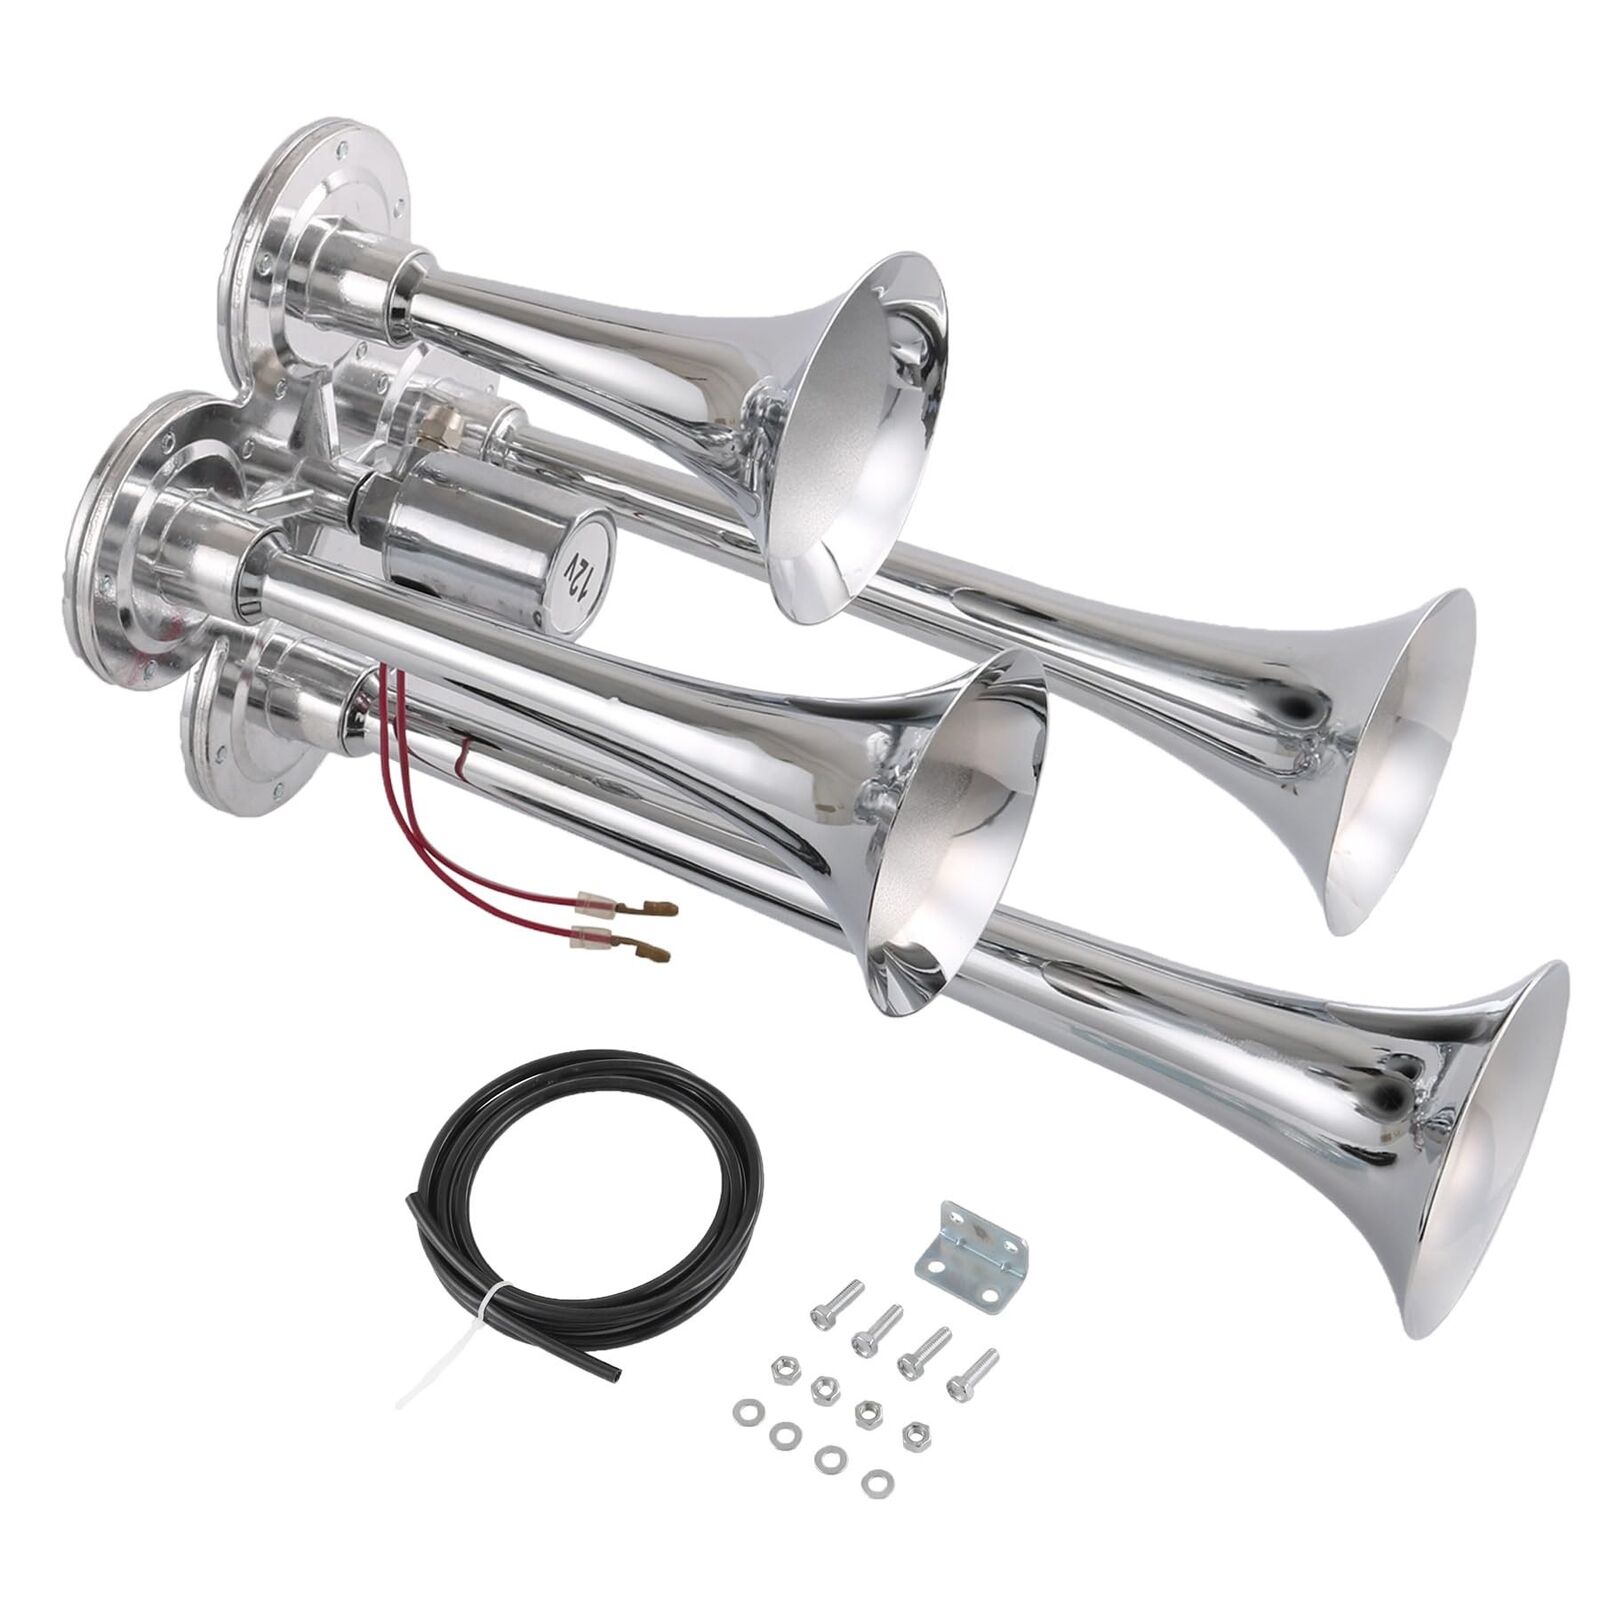 4 Trumpet Train Air Horn with 12V Electric Solenoid Universal 12 Volt Horns L...